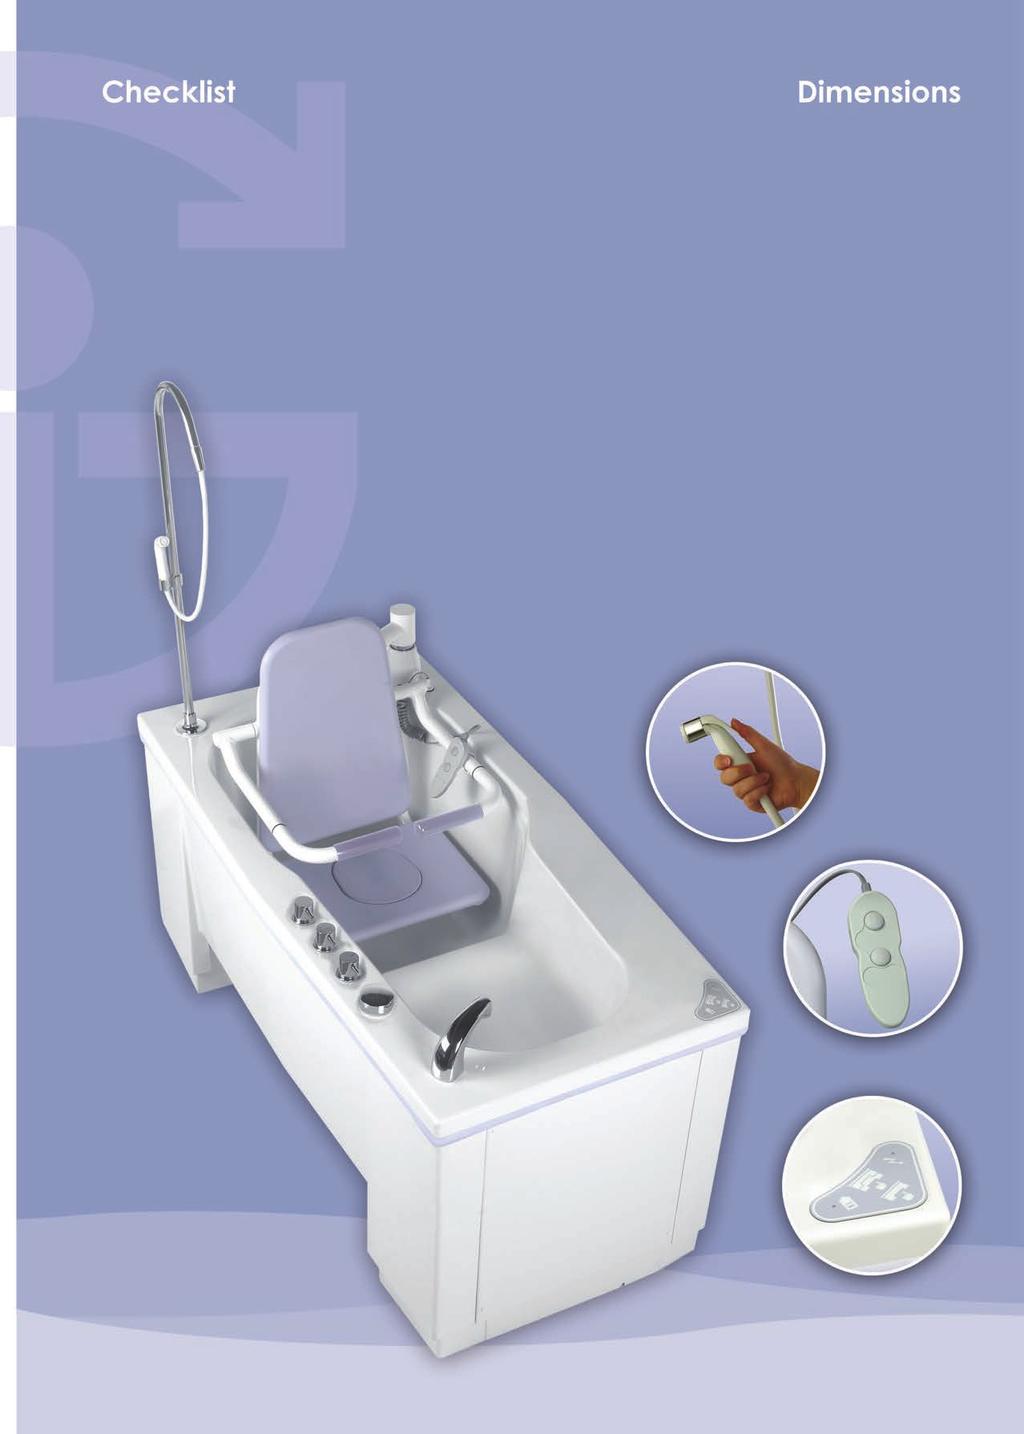 Compact 1600mm in length Detachable transfer seat (optional) TMV3 water temperature controls Soft touch seat with removable aperture Full battery back up Touch controls with diagnostic panel Hot and